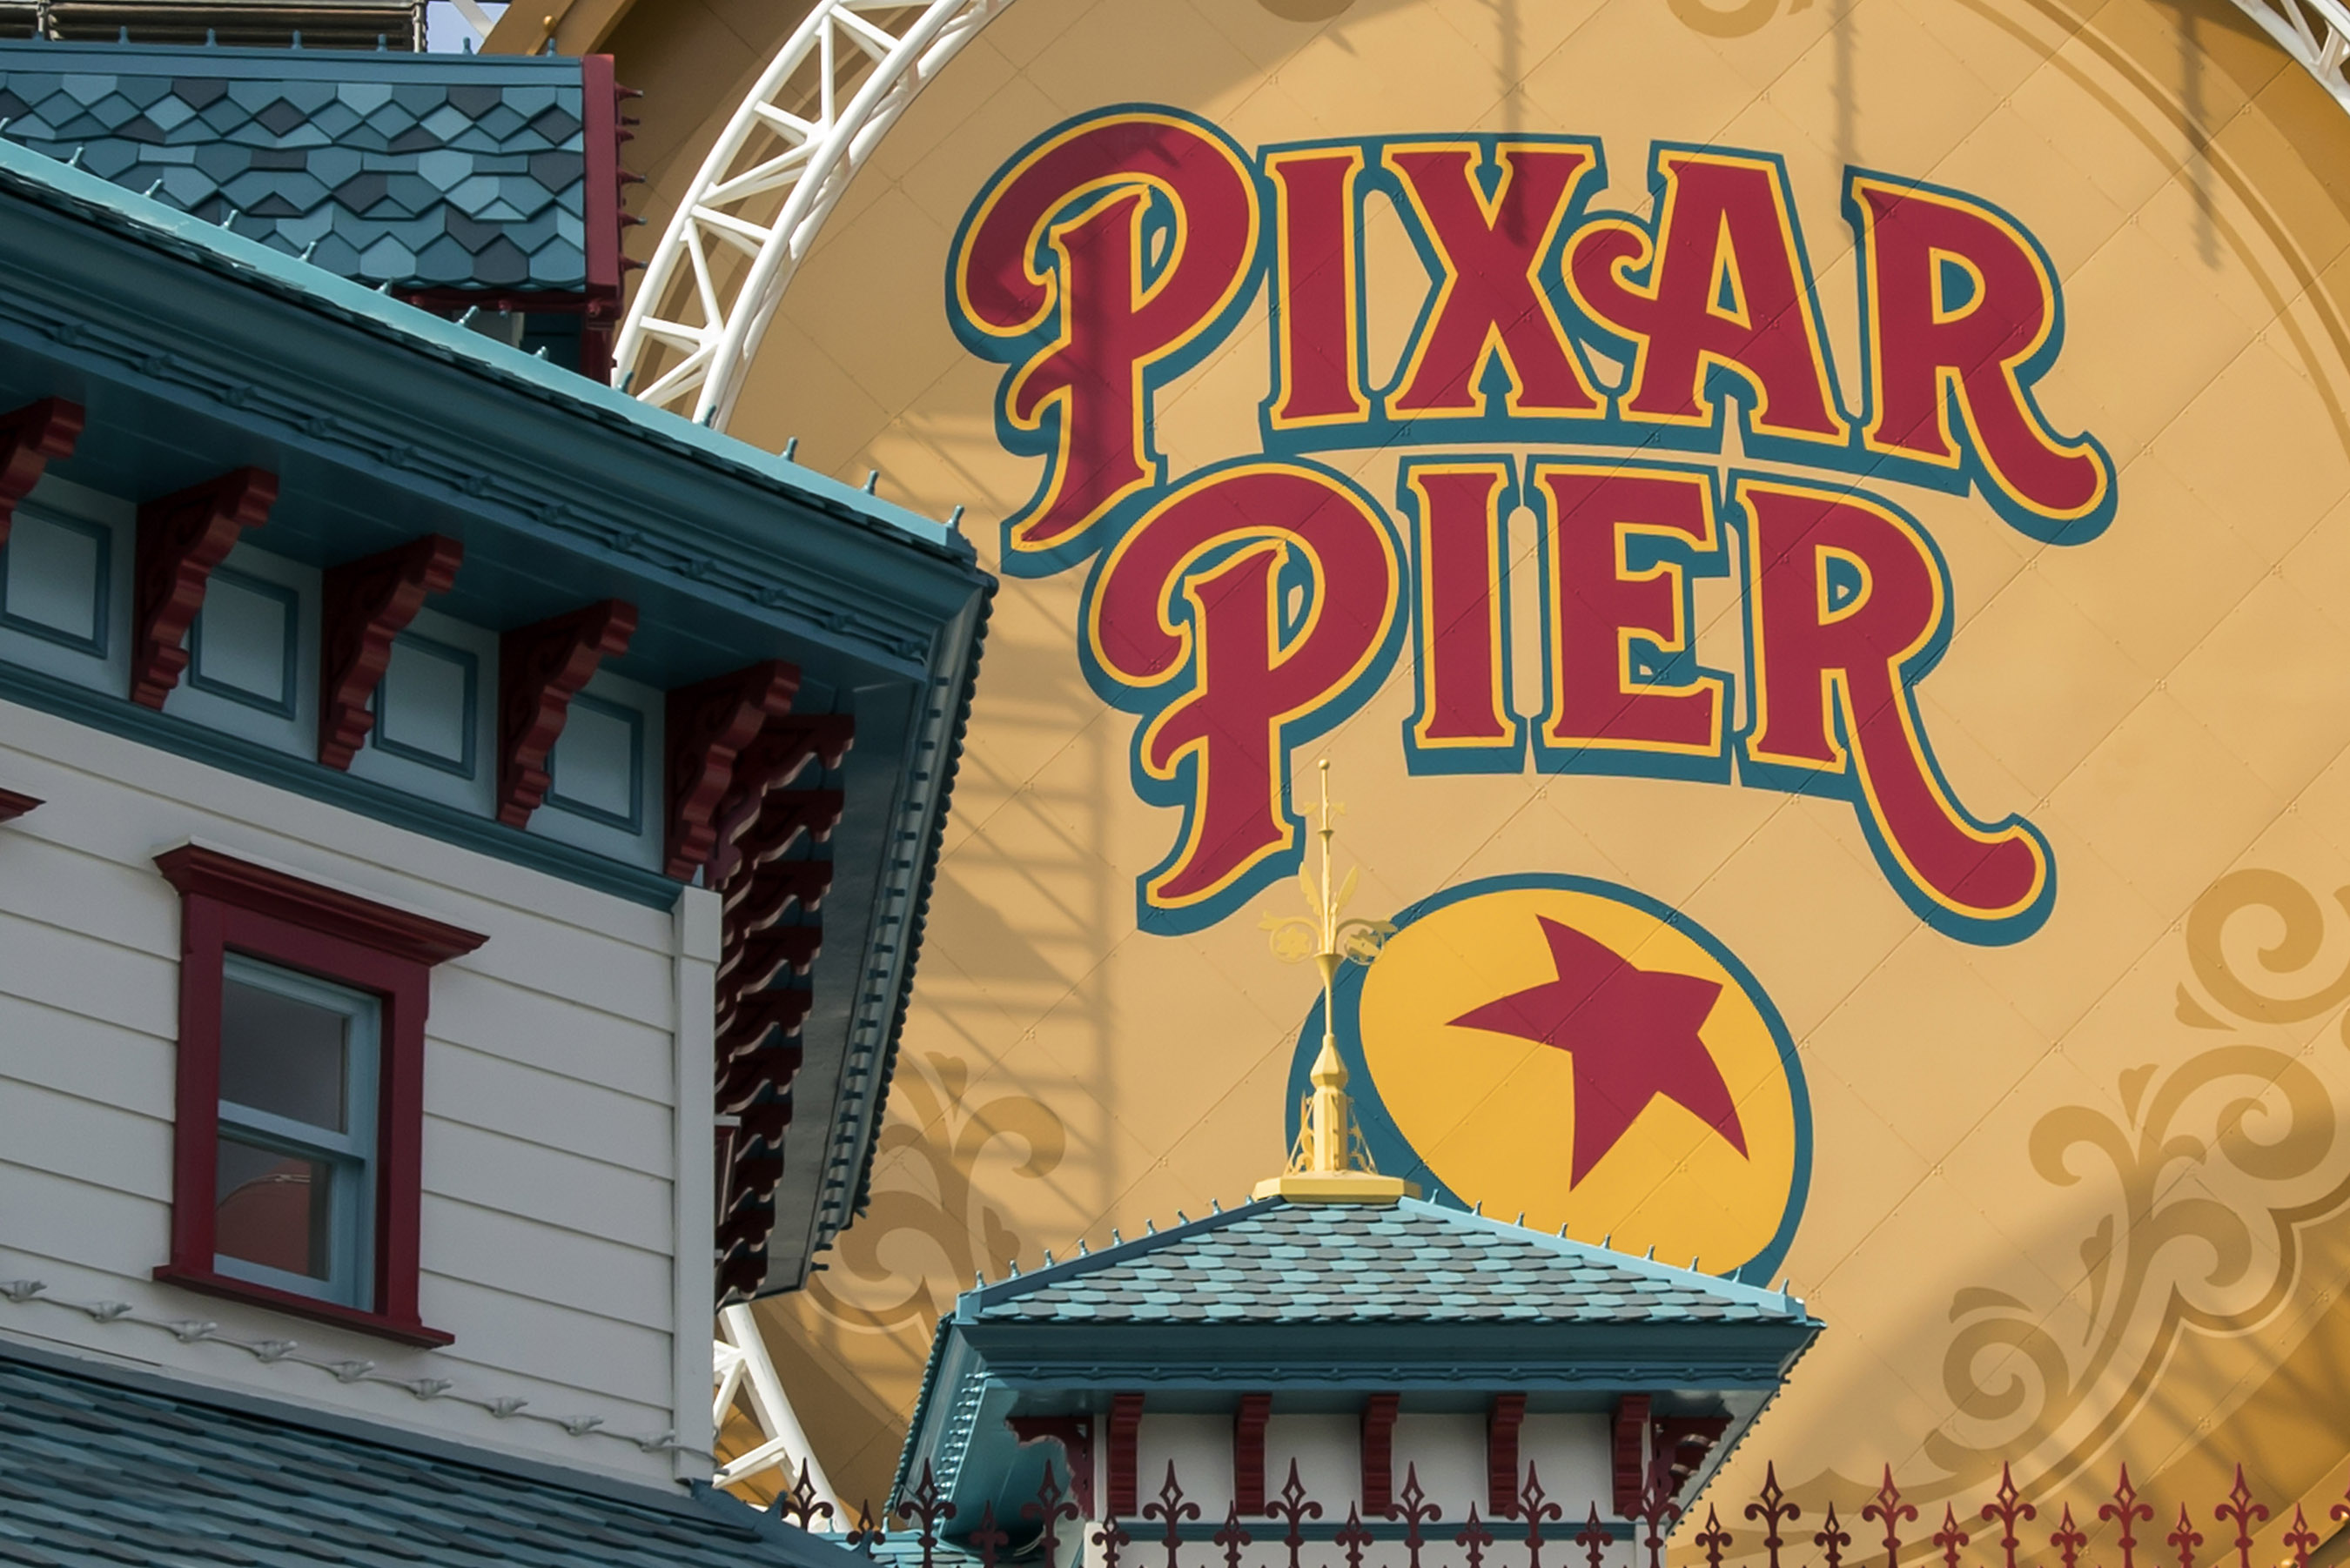 Hold on to Your Super Suits! Disneyland Resort Debuts the Thrilling Incredicoaster as Pixar Pier Opens June 23 at Disney California Adventure Park